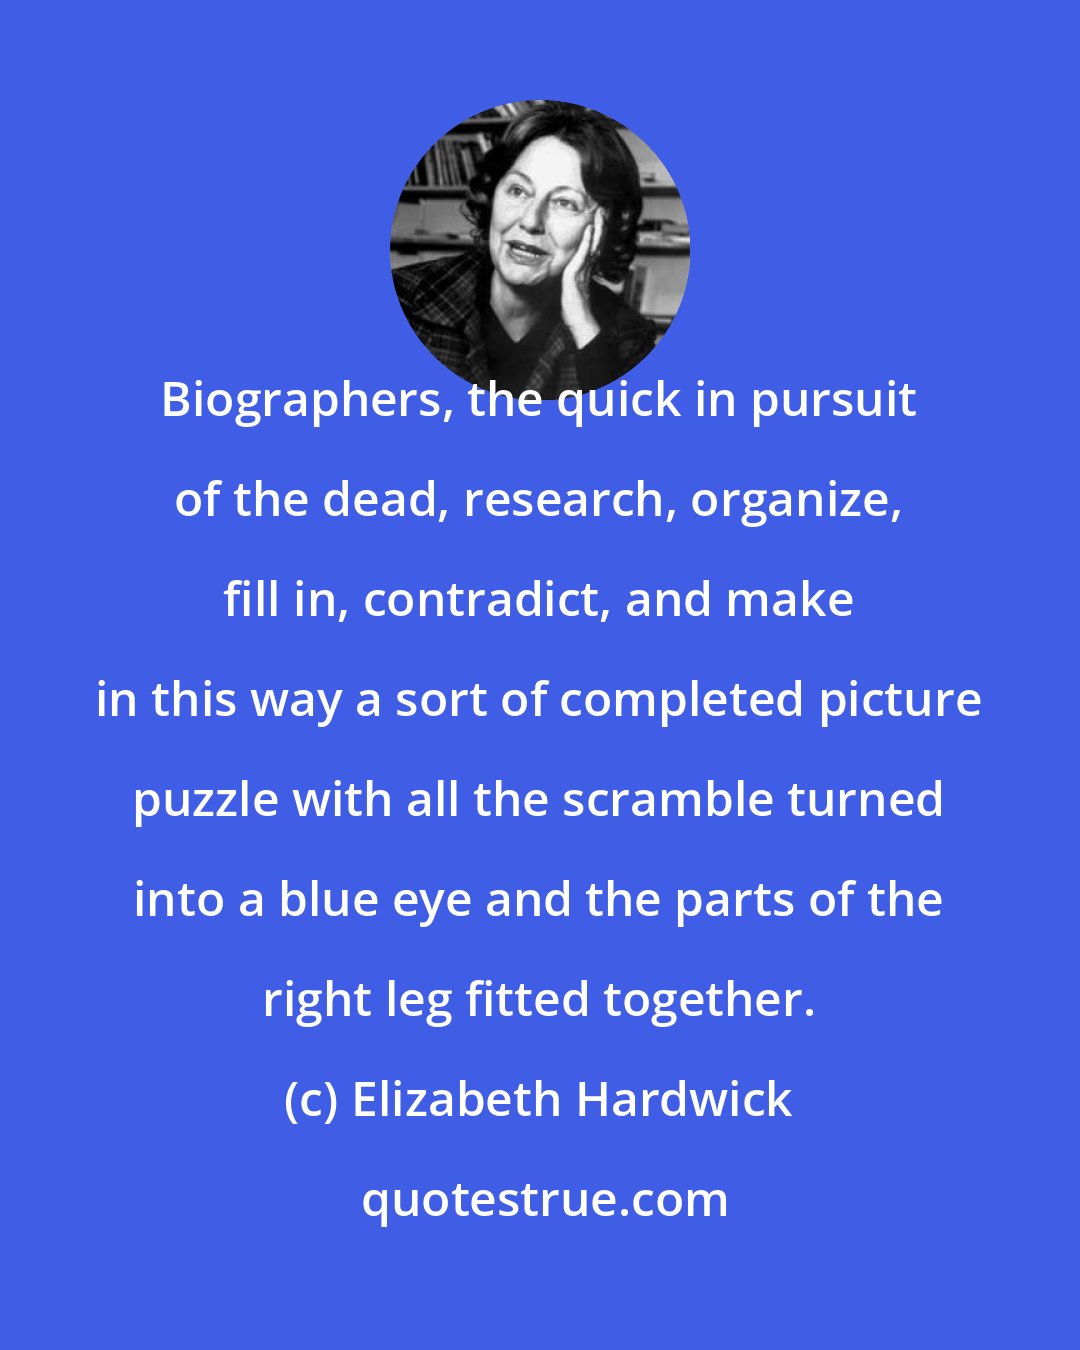 Elizabeth Hardwick: Biographers, the quick in pursuit of the dead, research, organize, fill in, contradict, and make in this way a sort of completed picture puzzle with all the scramble turned into a blue eye and the parts of the right leg fitted together.